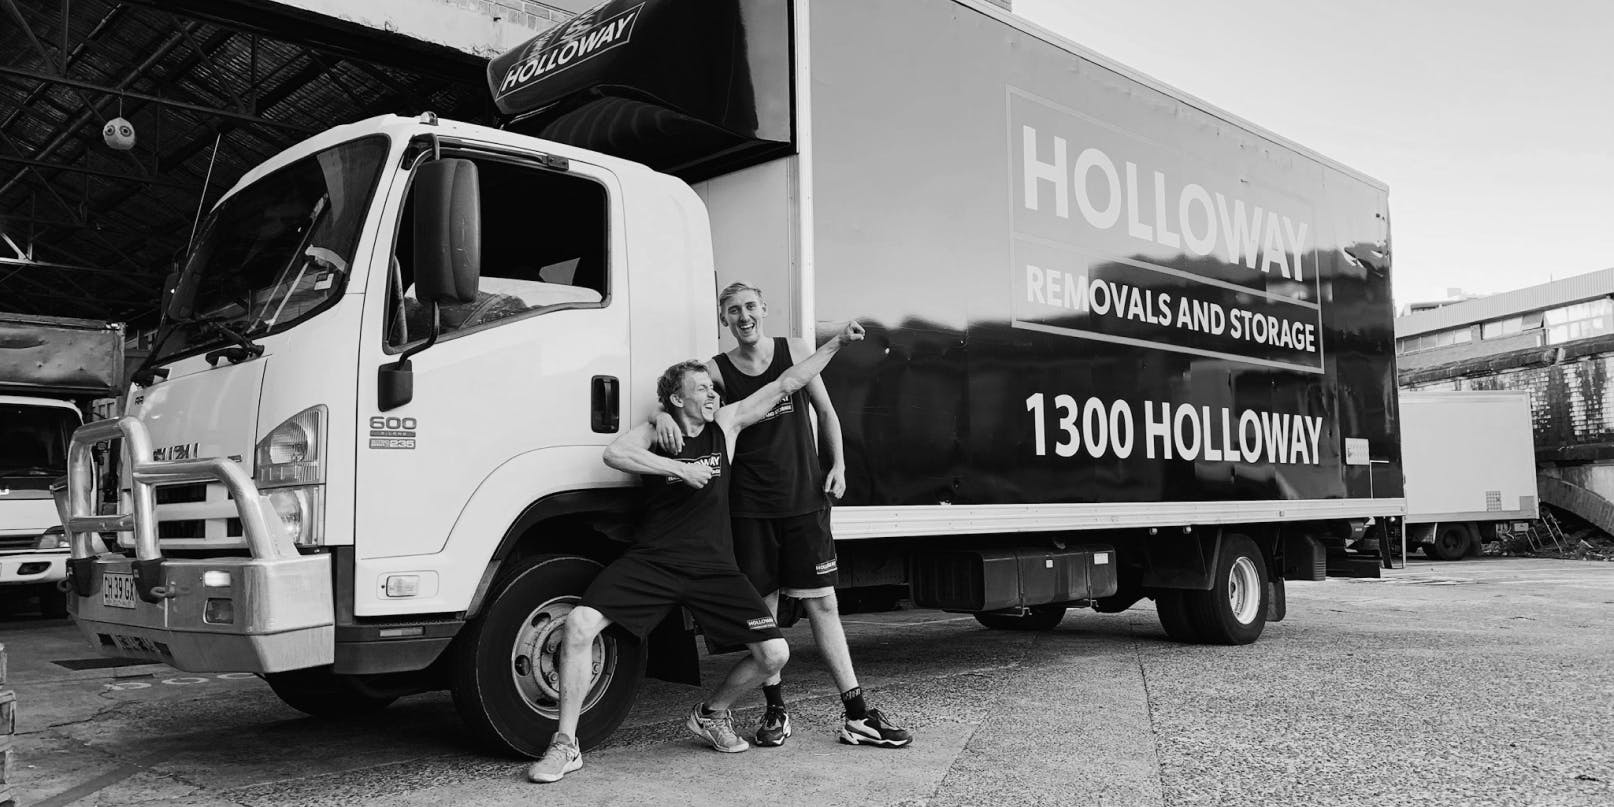 Holloway team posing in front of a truck